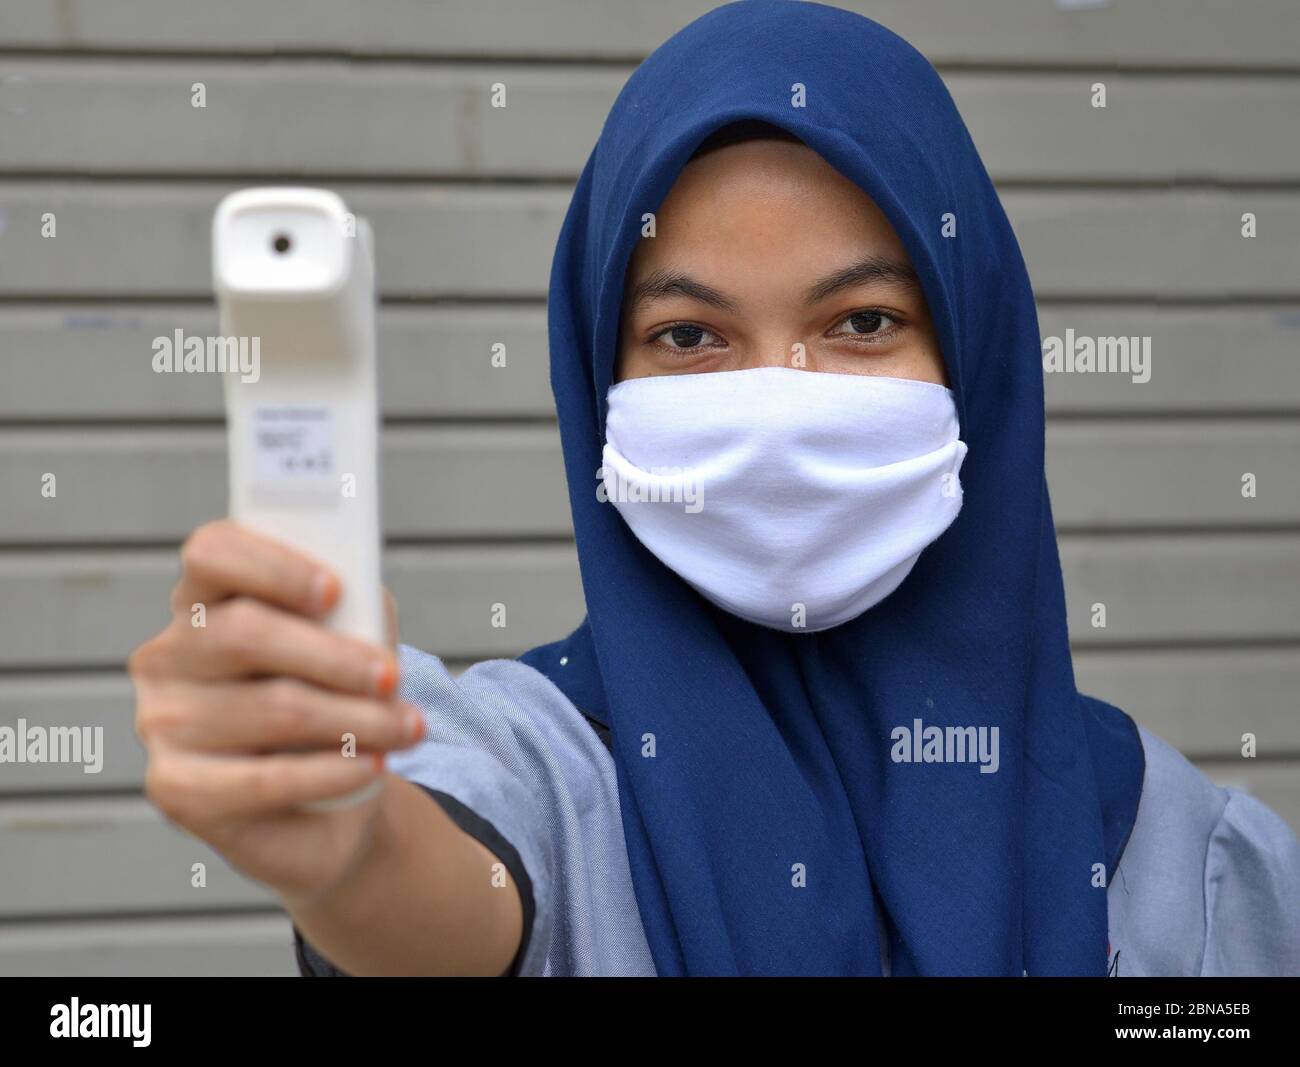 Muslim Malay girl with hijab and mouth-covering veil takes forehead temperature during Corona pandemic. Stock Photo